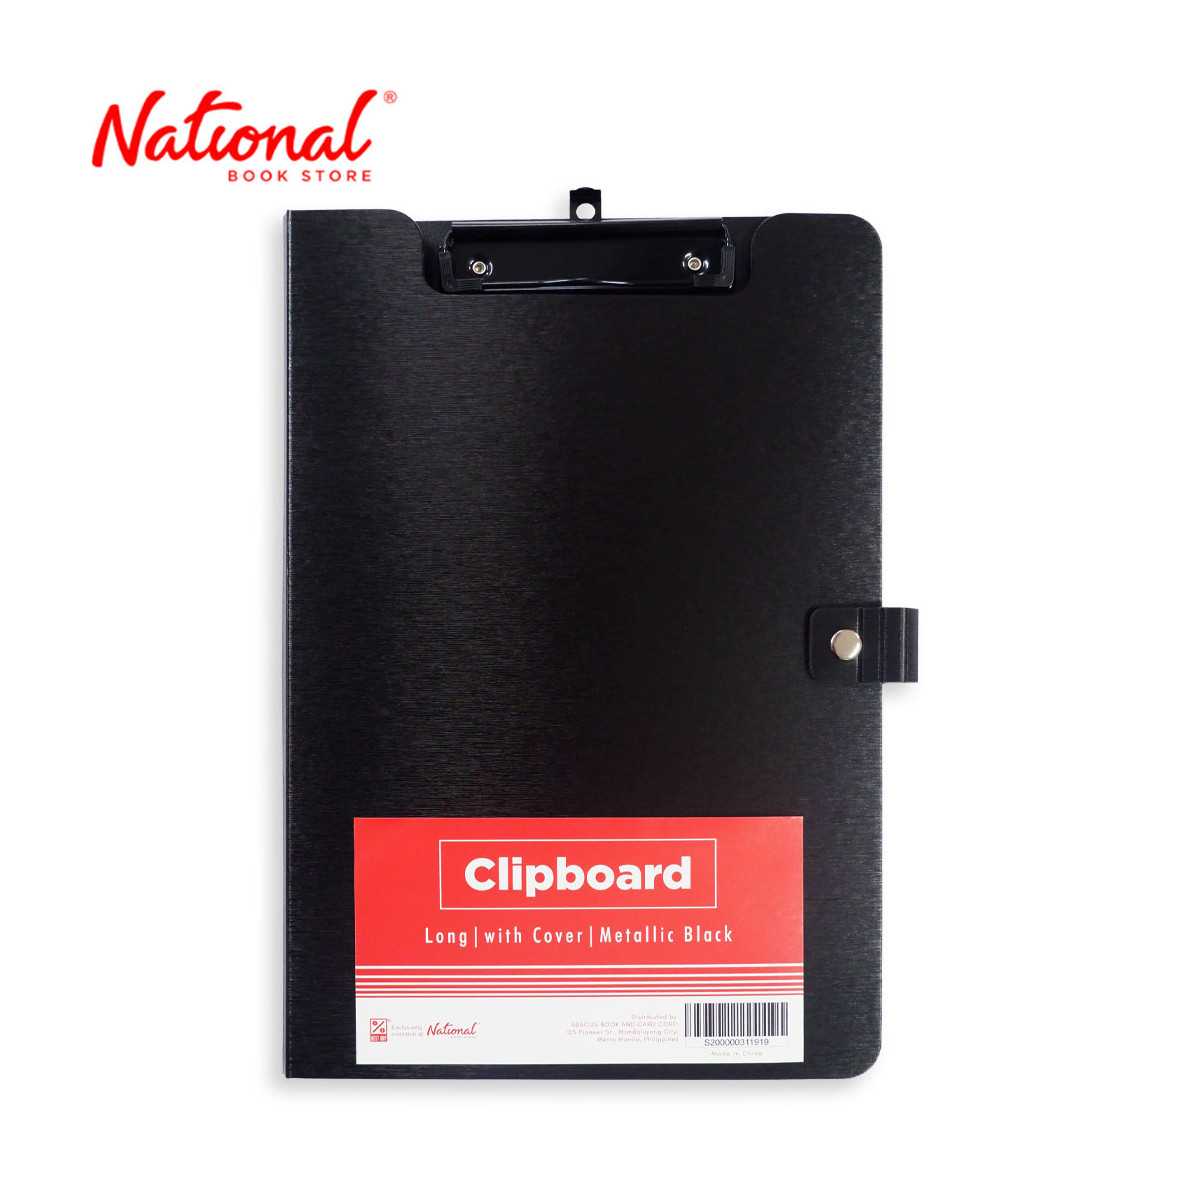 Best Buy Clipboard FPT-11-BK Long with cover, Metallic Black - Office Supplies - Filing Supplies